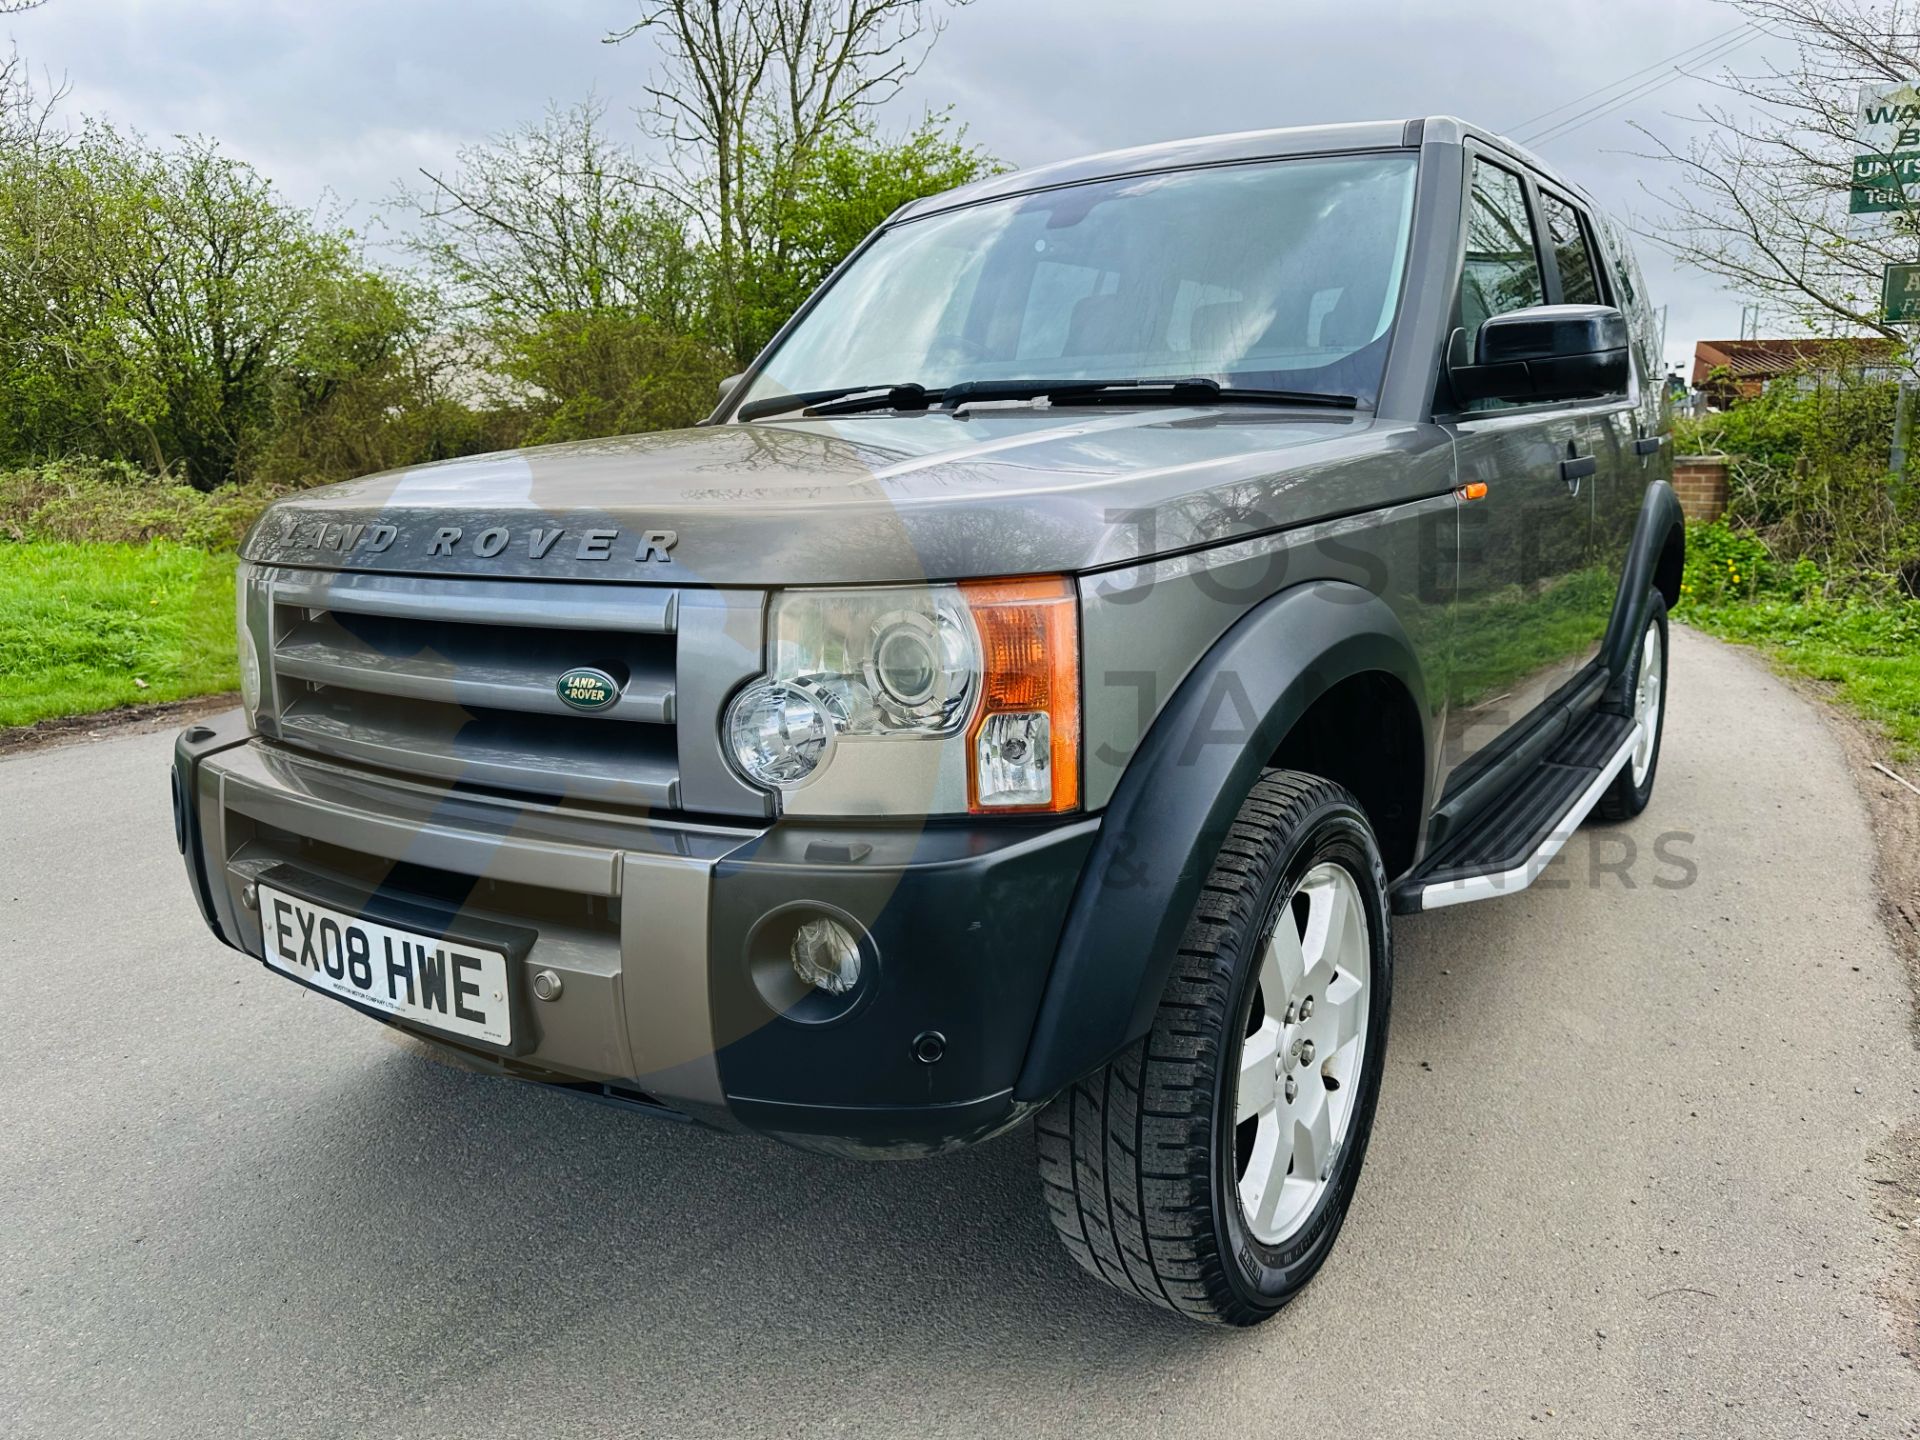 (ON SALE) LAND ROVER DISCOVERY TDV6 *HSE EDITION* AUTO (08 REG) 7 SEATER - 12X SERVICES (NO VAT) - Image 4 of 51